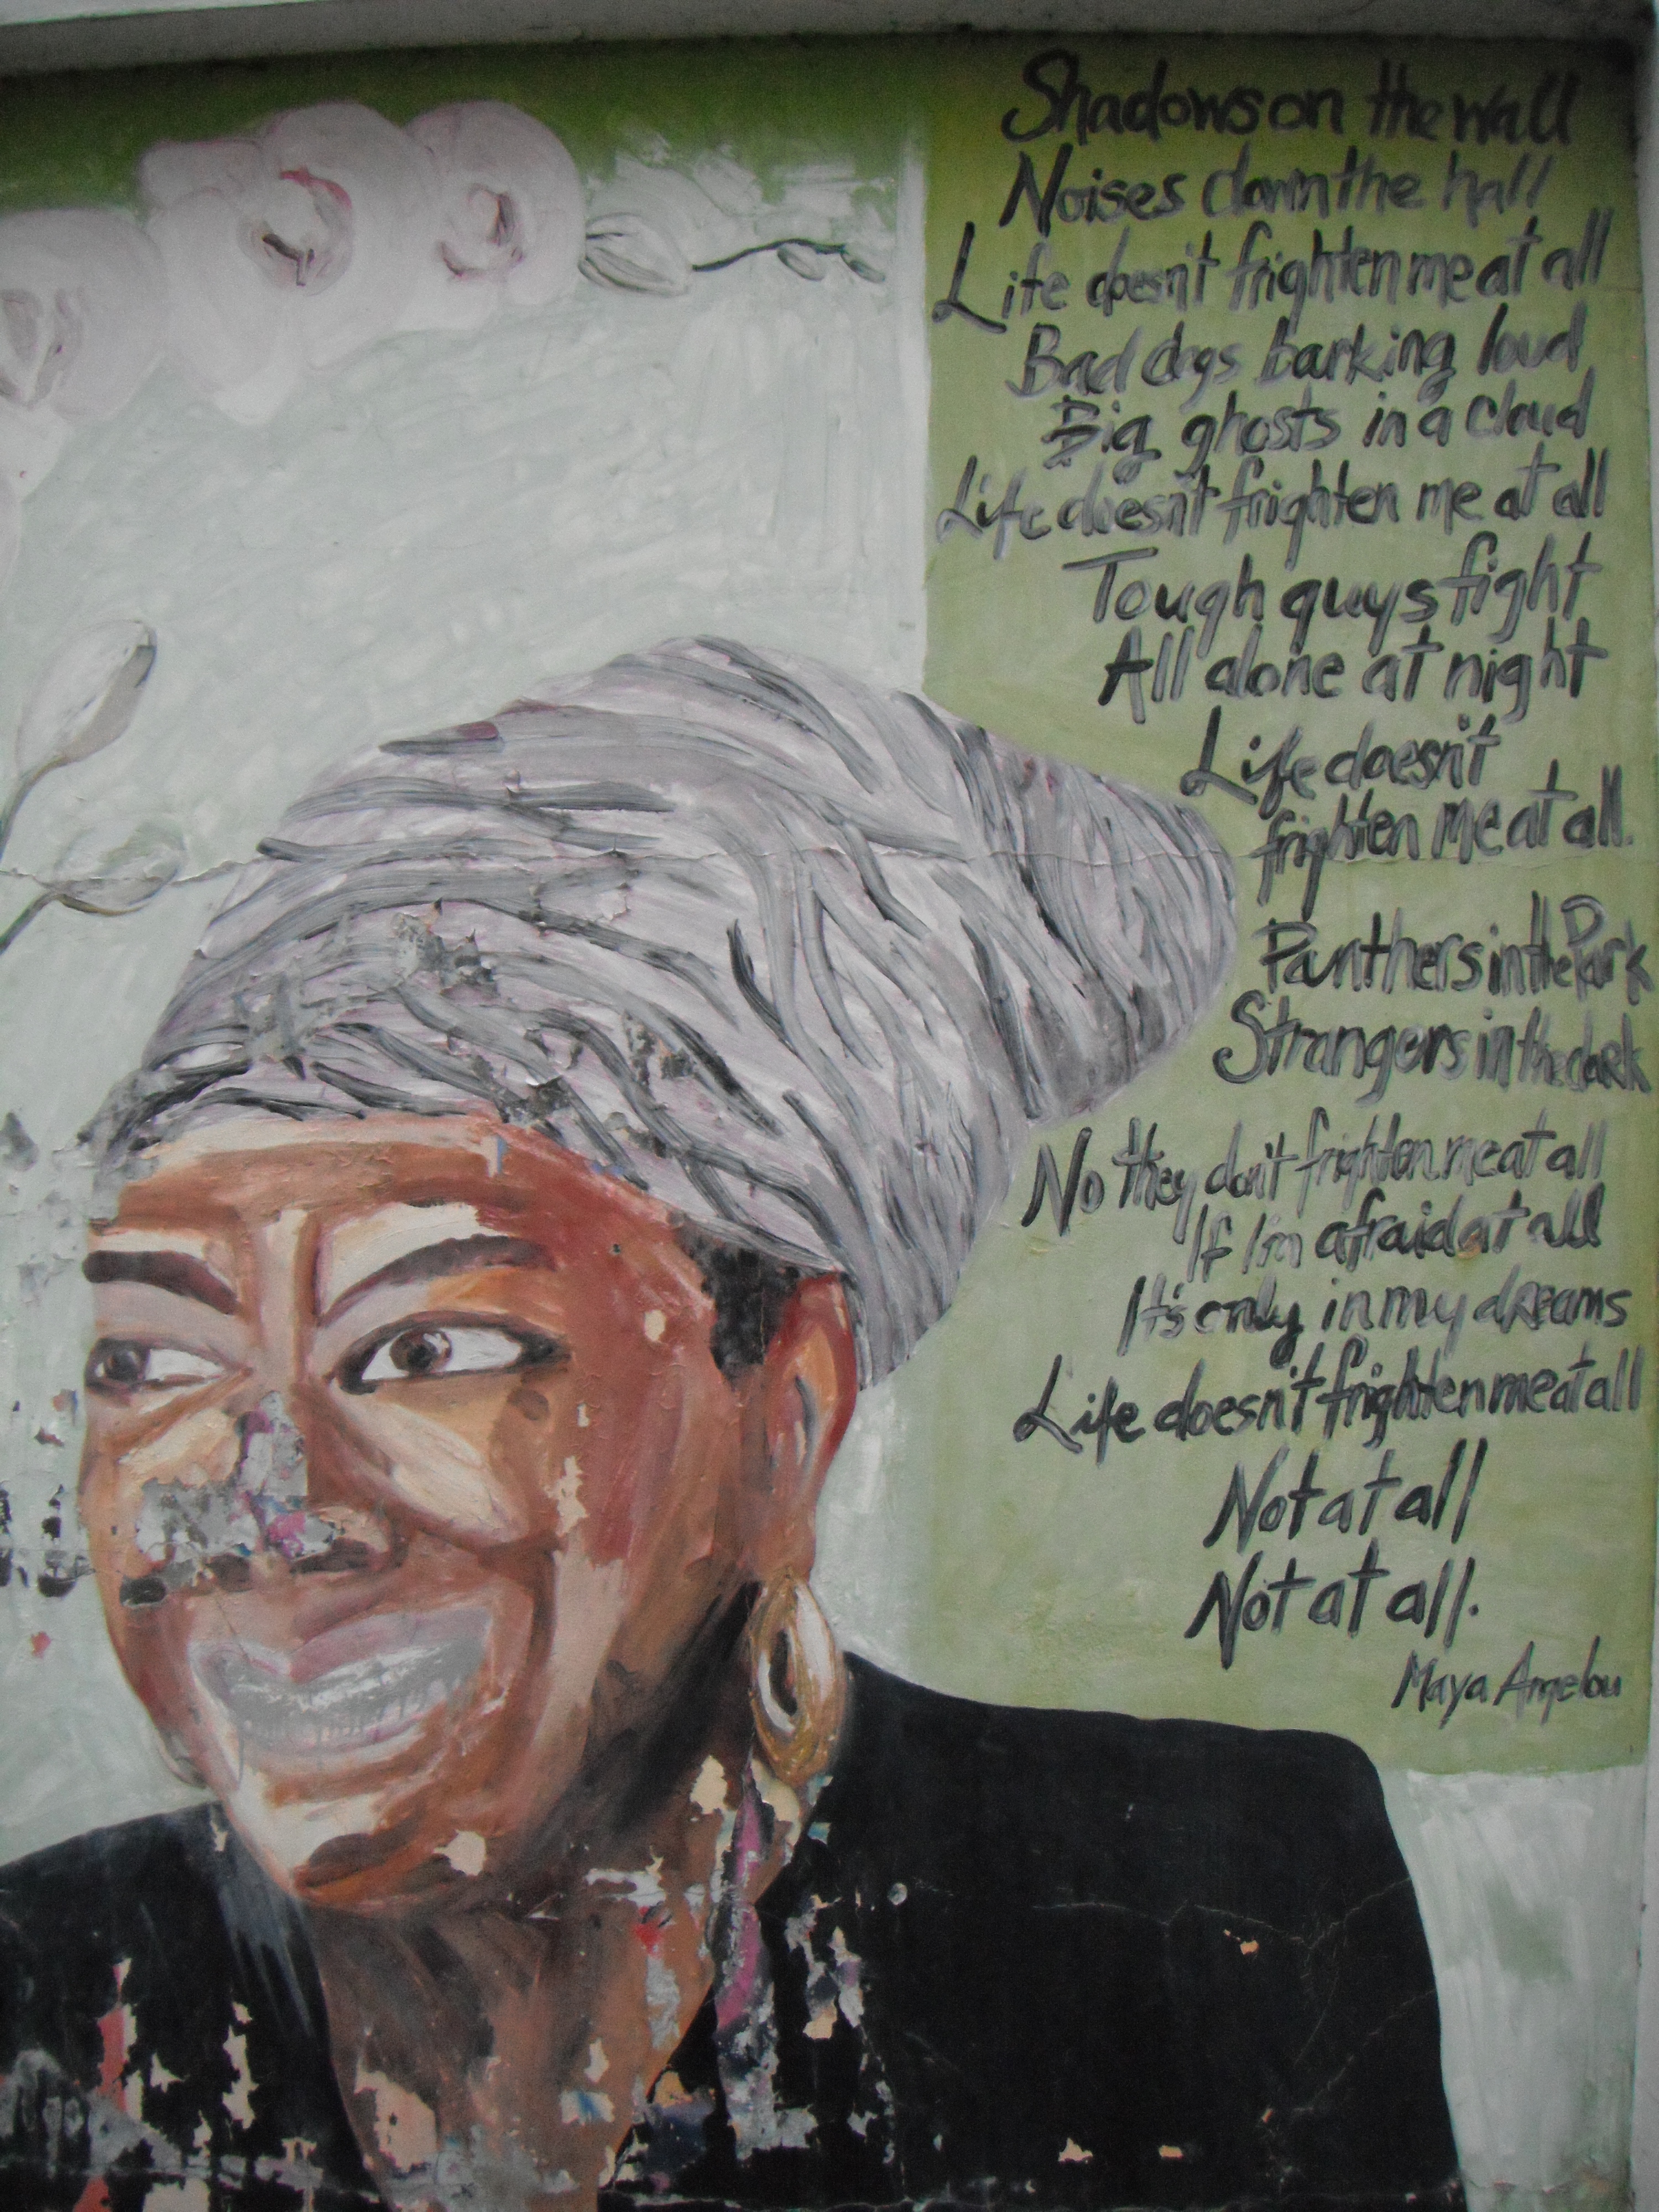 Power audre lorde essay